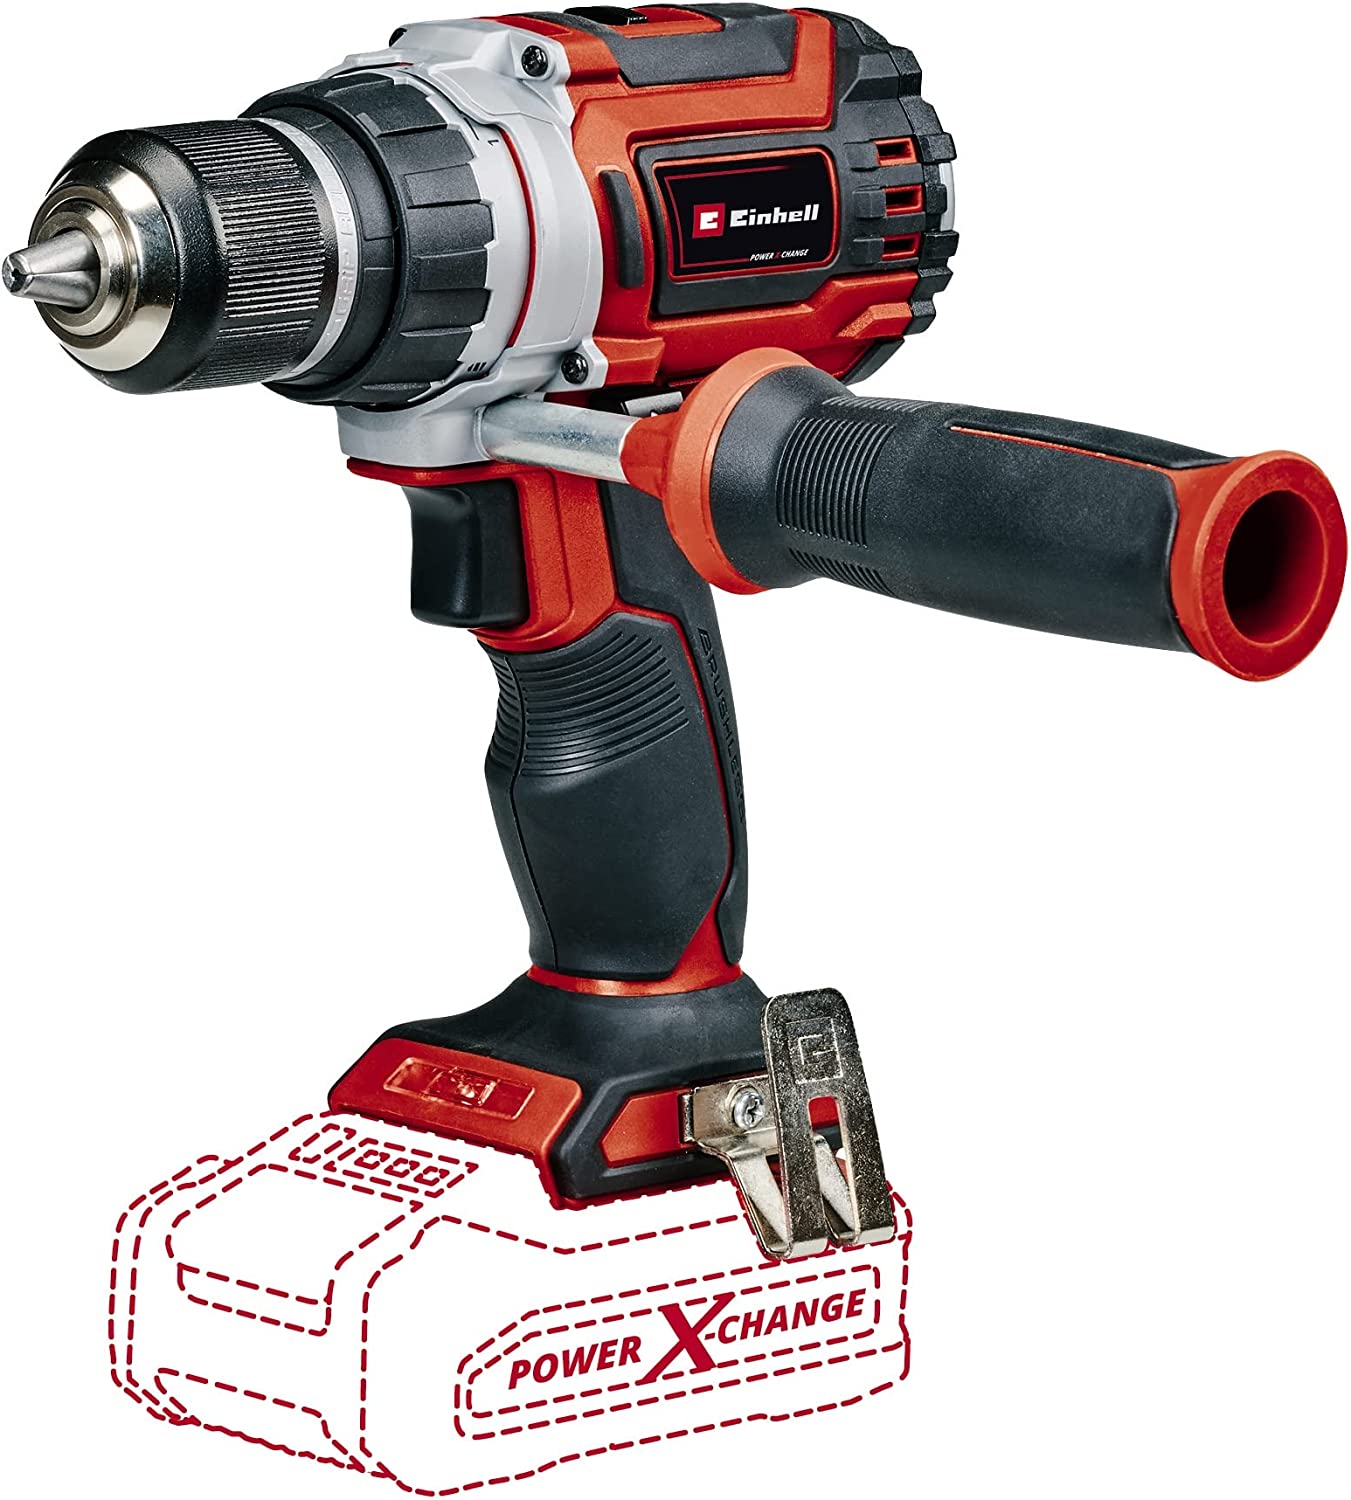 Einhell Cordless Drill TP-CD 18/60 Li BL - Solo (red/black, without battery and charger)